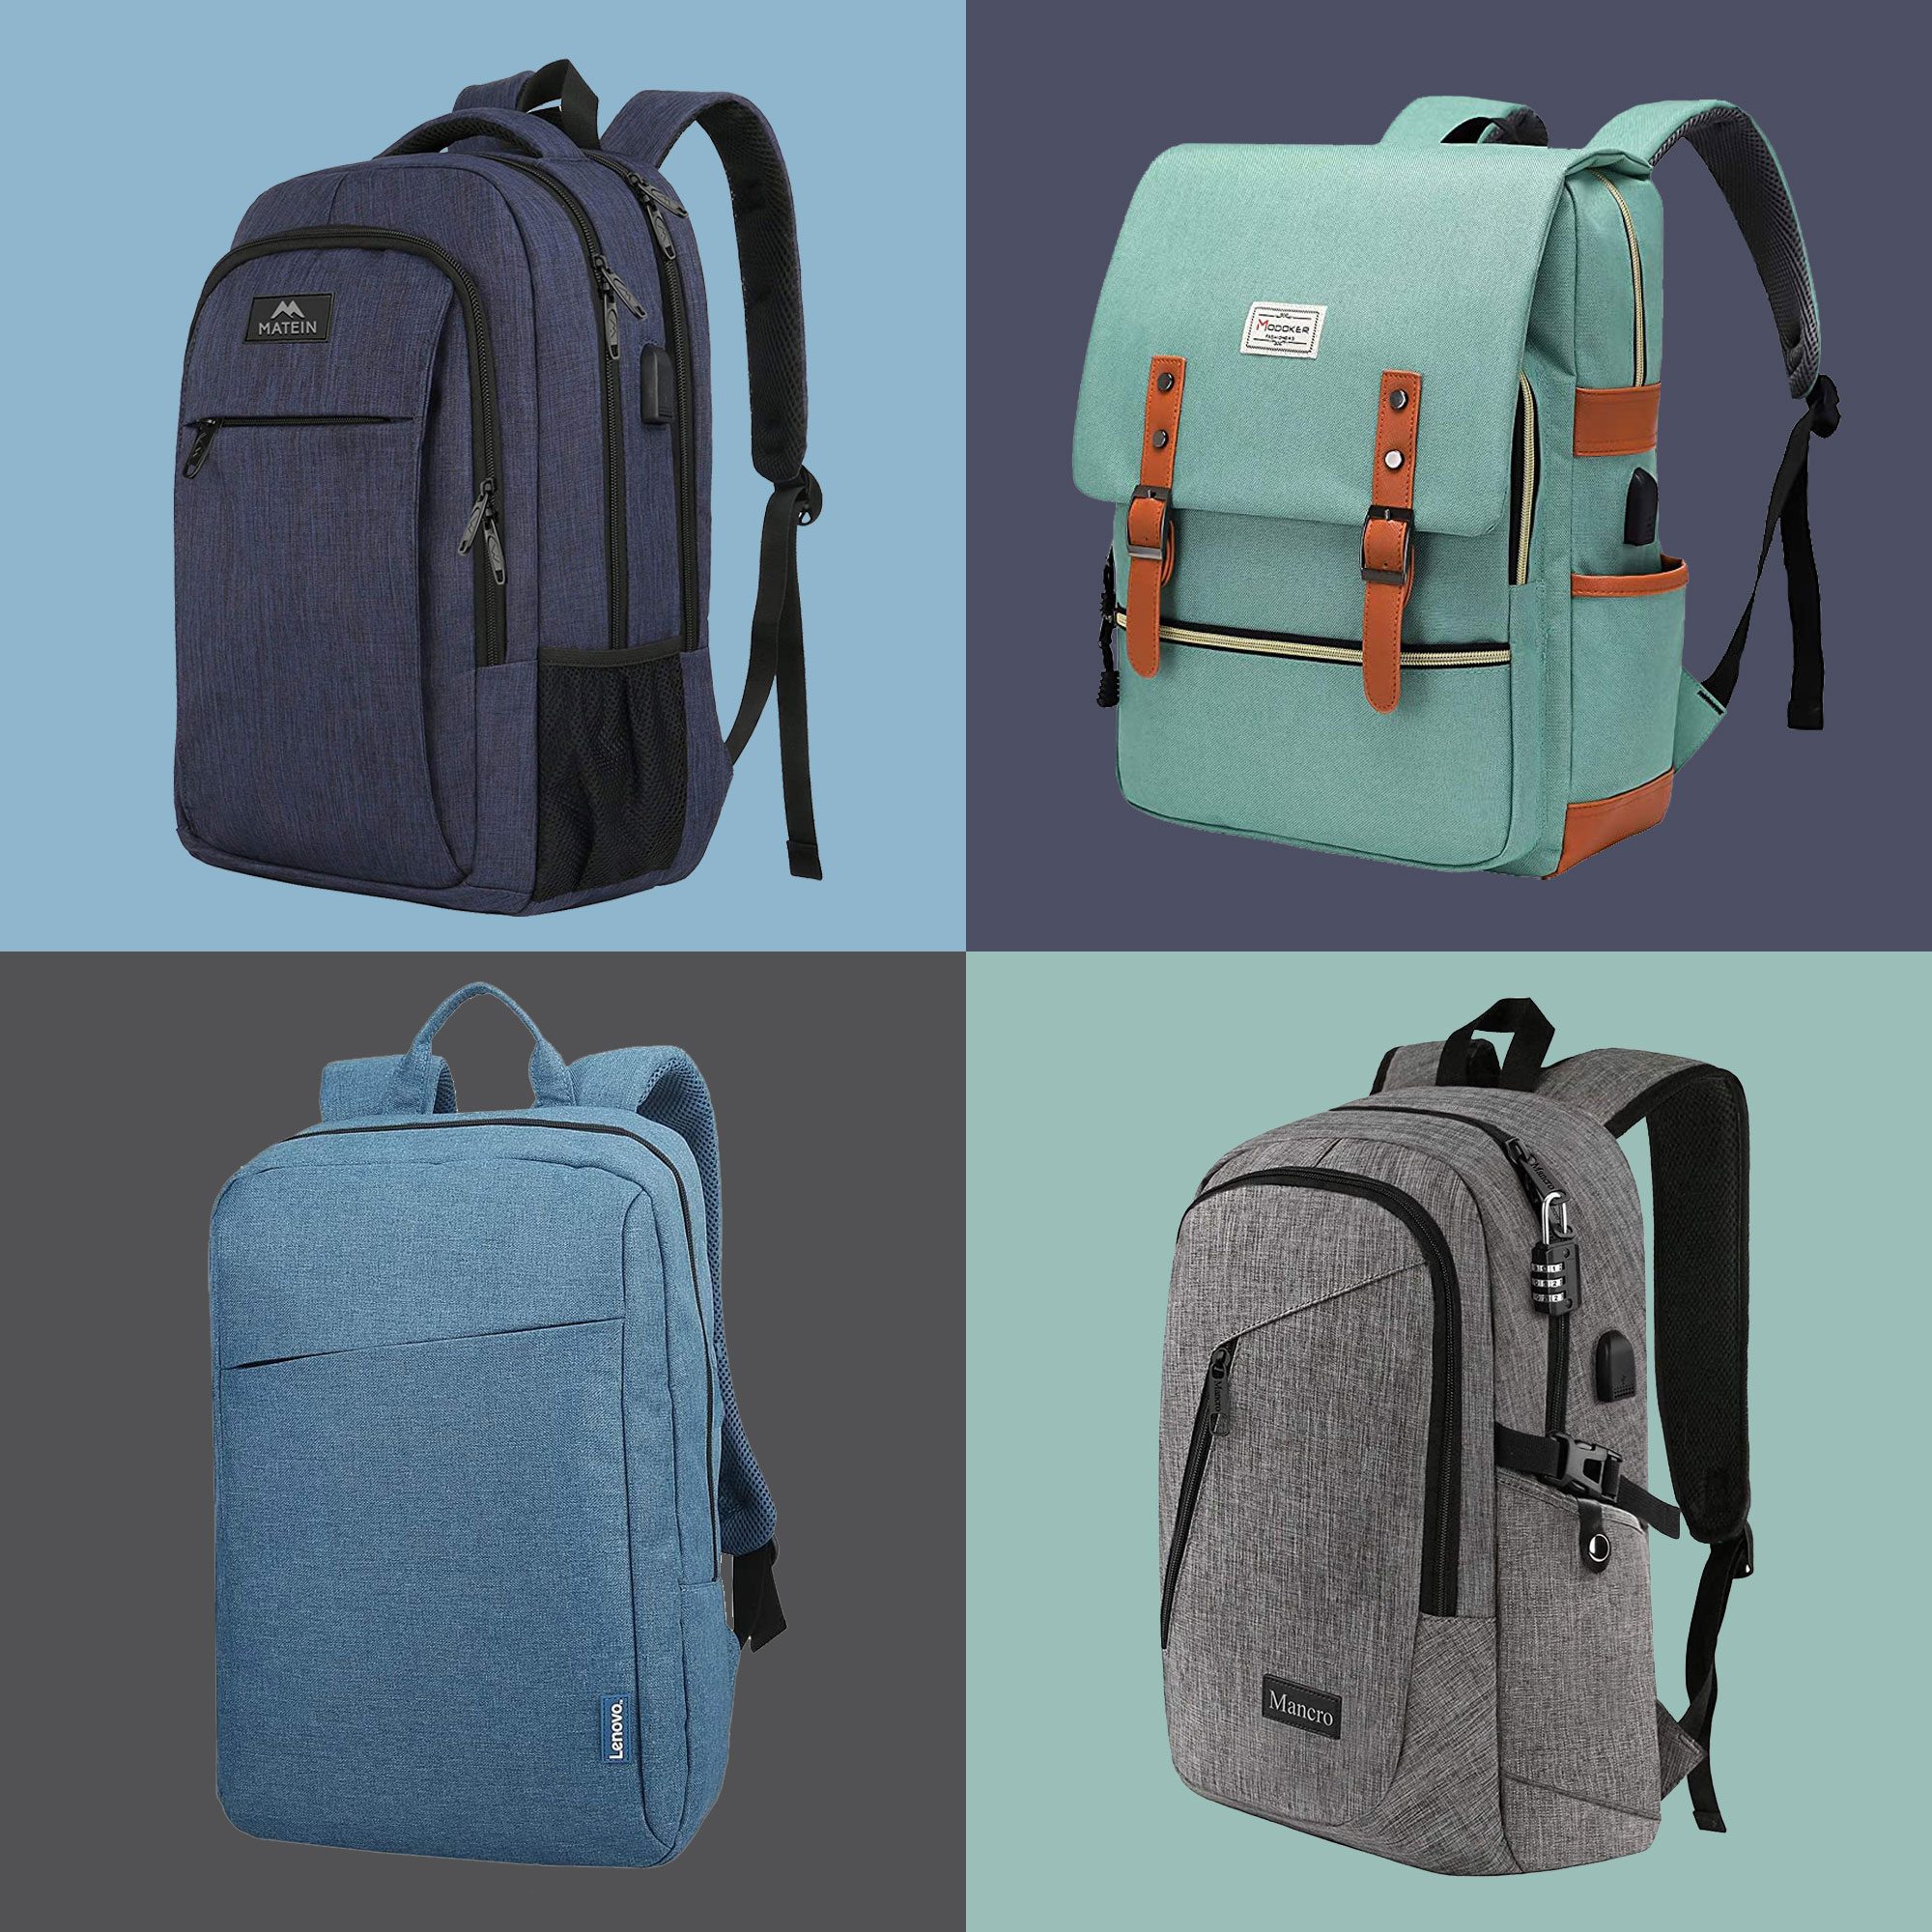 Best Laptop Backpacks at Every Price Point